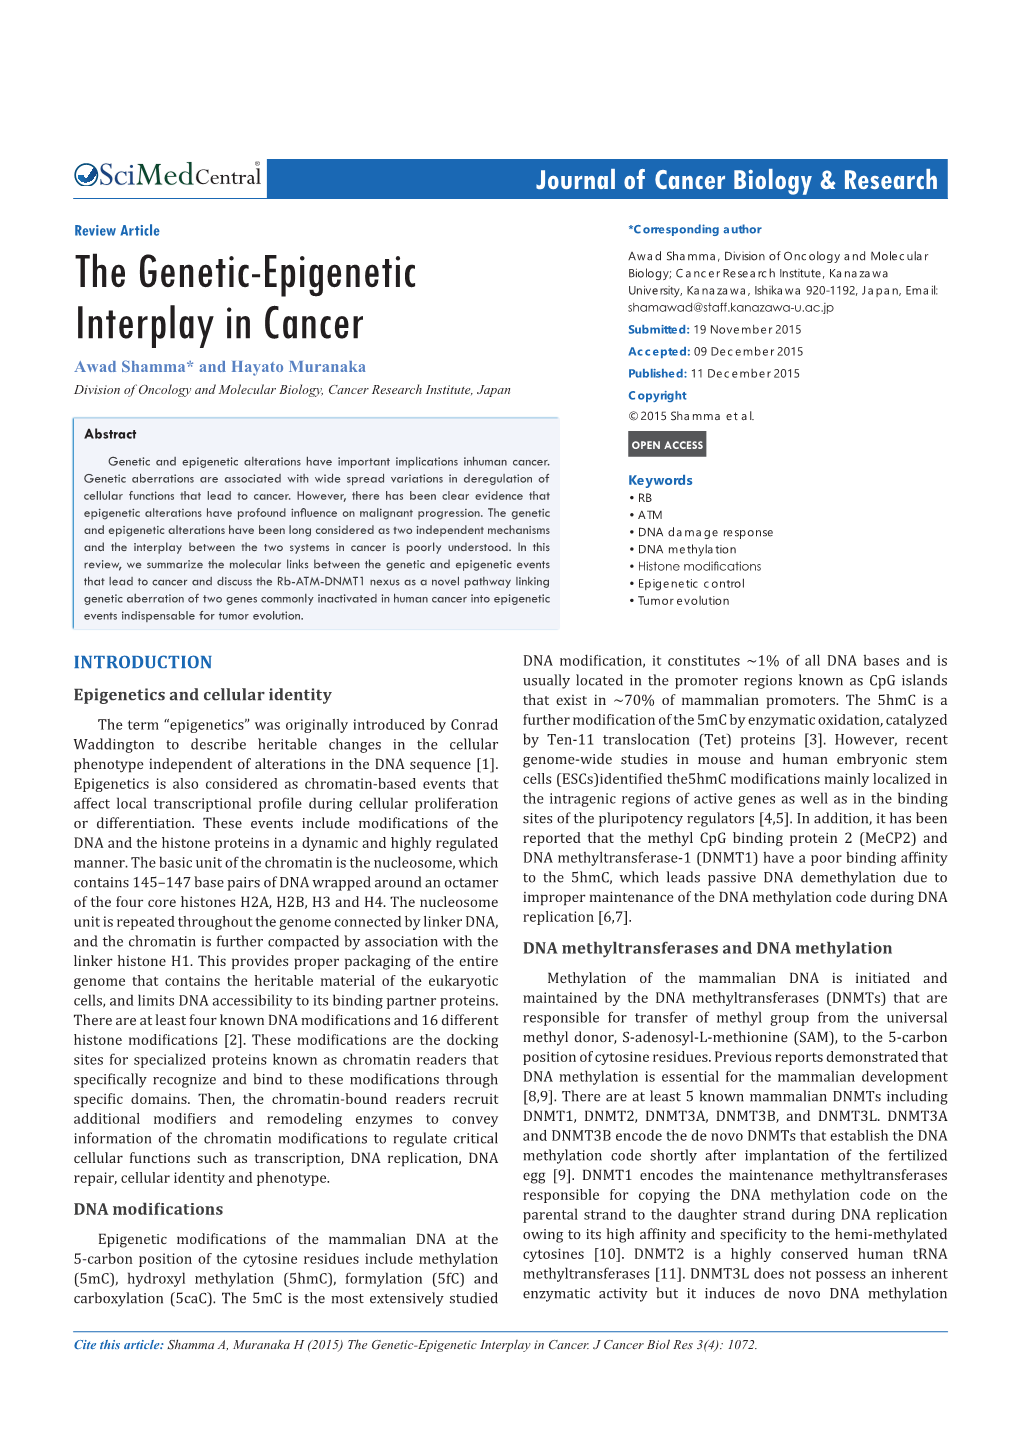 The Genetic-Epigenetic Interplay in Cancer